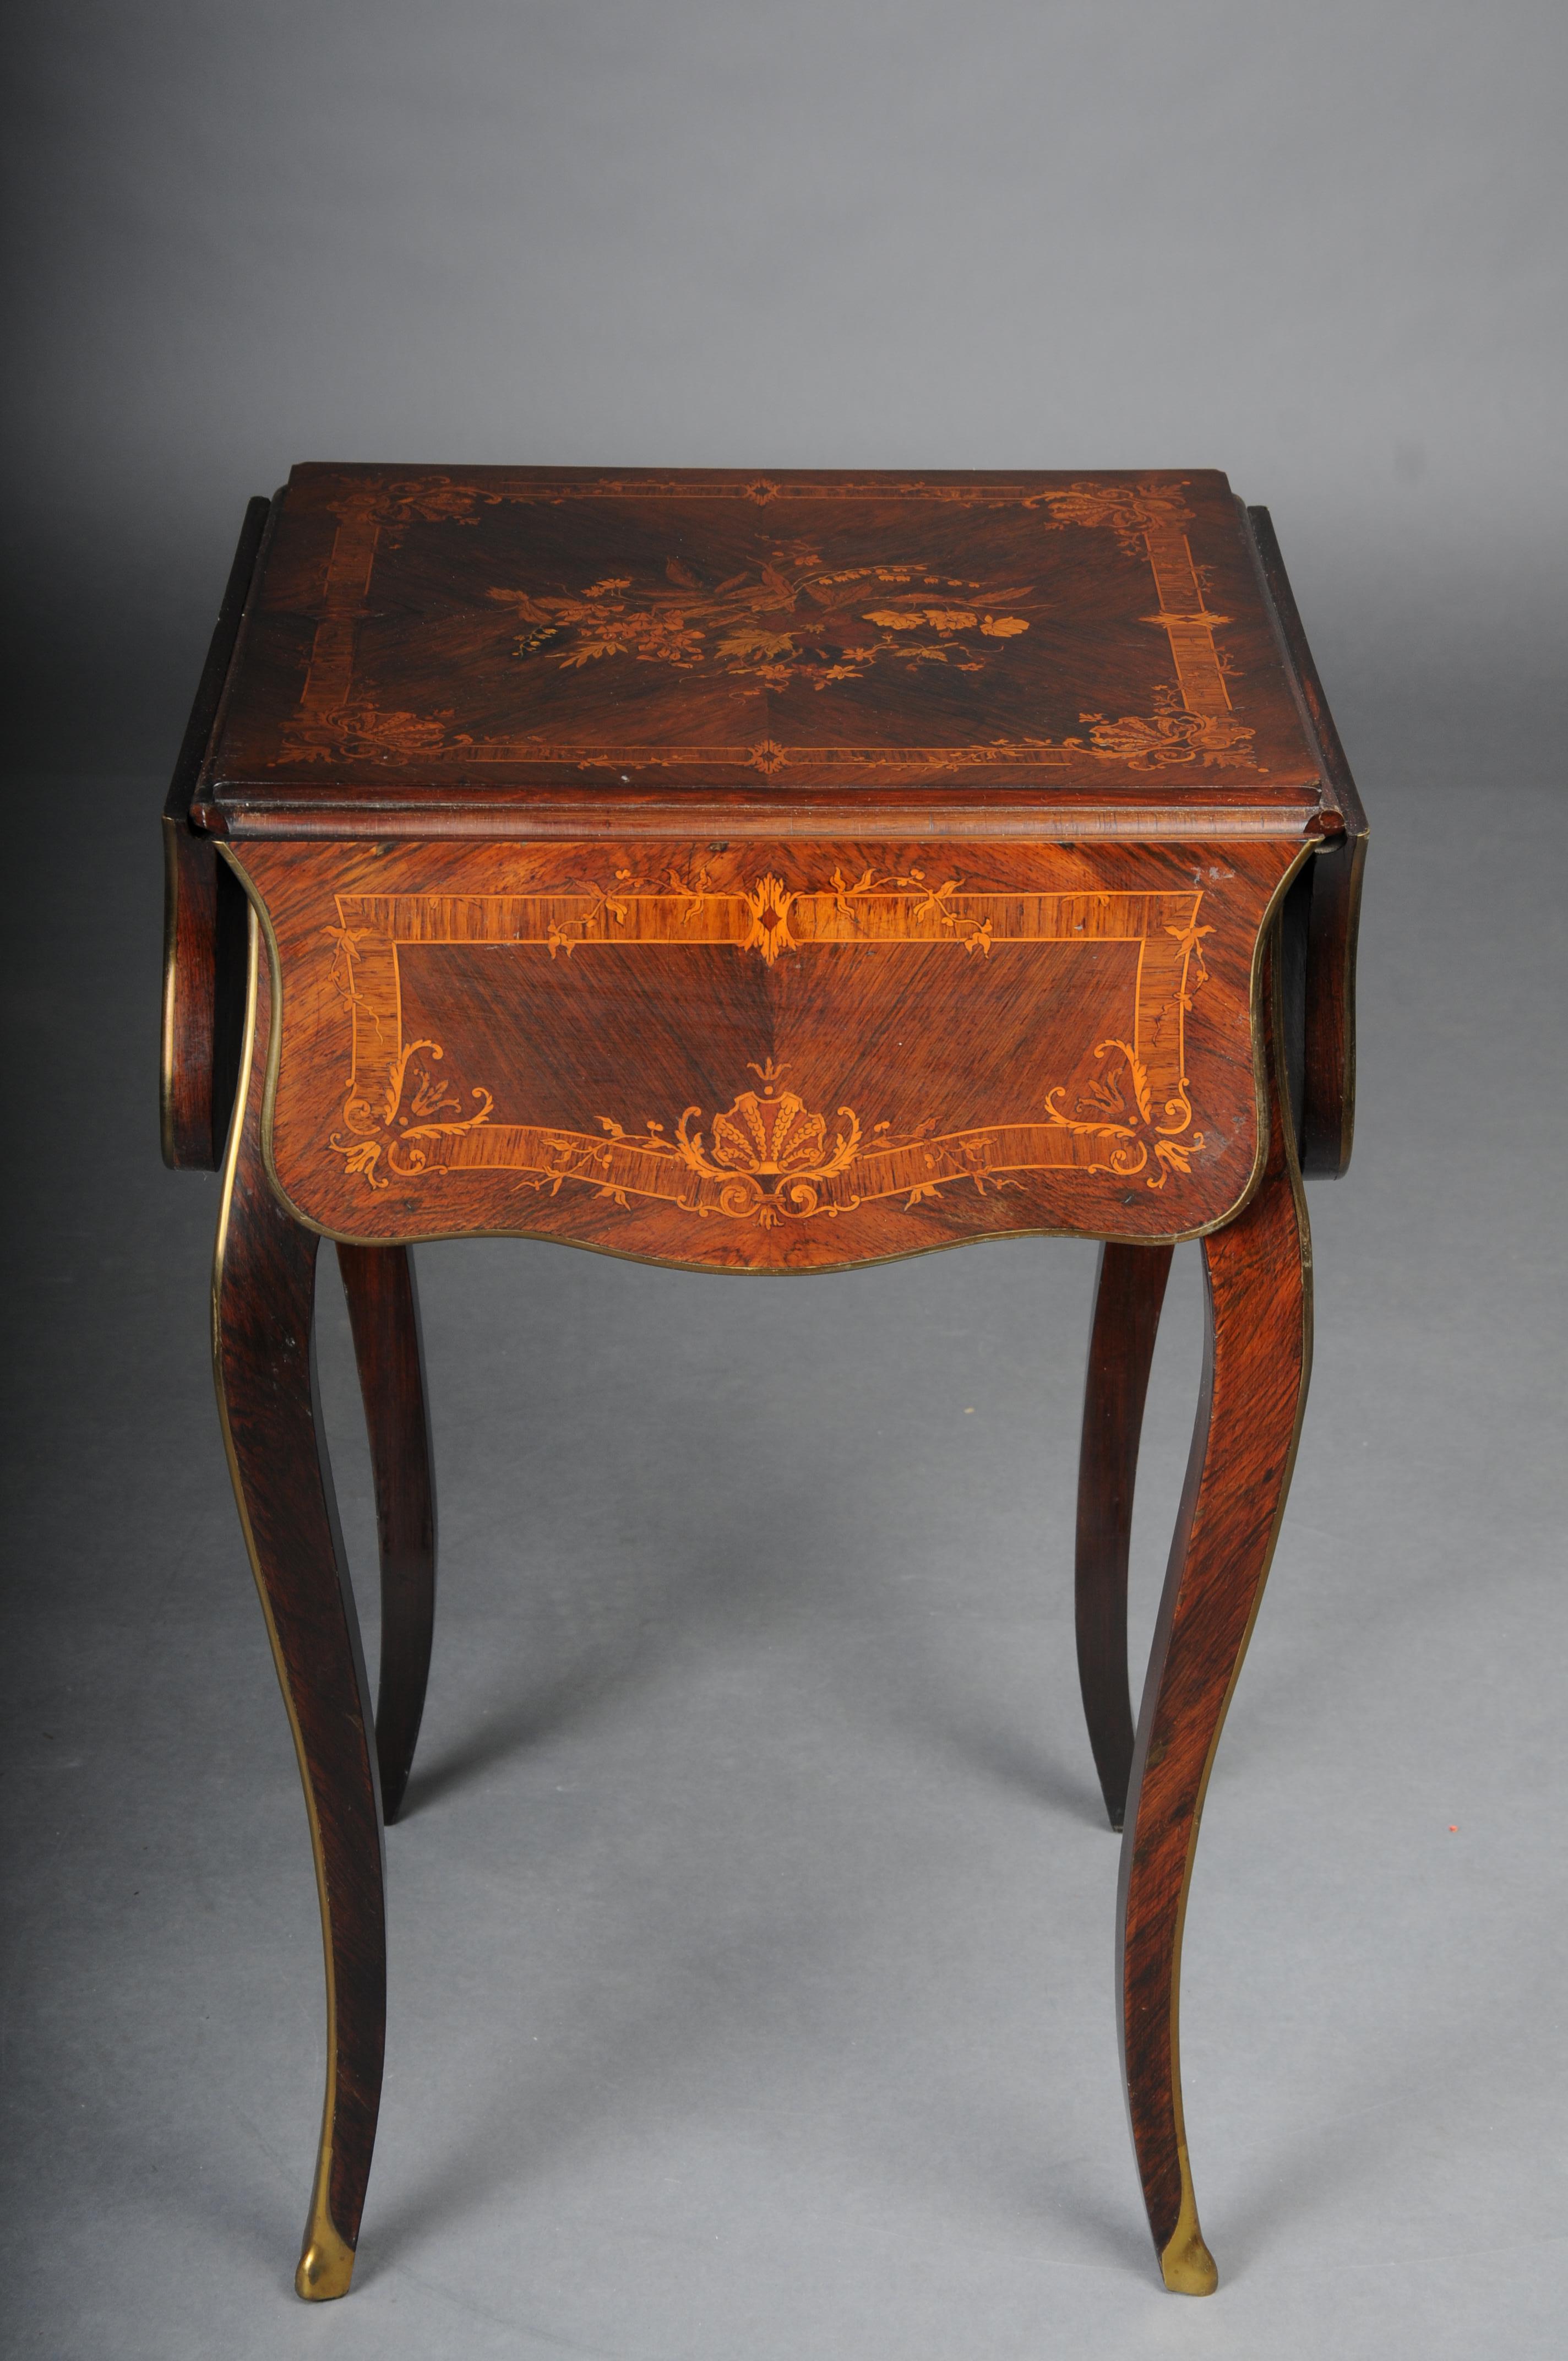 Antique side table, Paris around 1870 marquetry veneer.

Very highly finished inlaid folding side table with fine marquetry. Table edges refined with gold-plated brass strip.

The side table can be opened from any side and has a very useful and